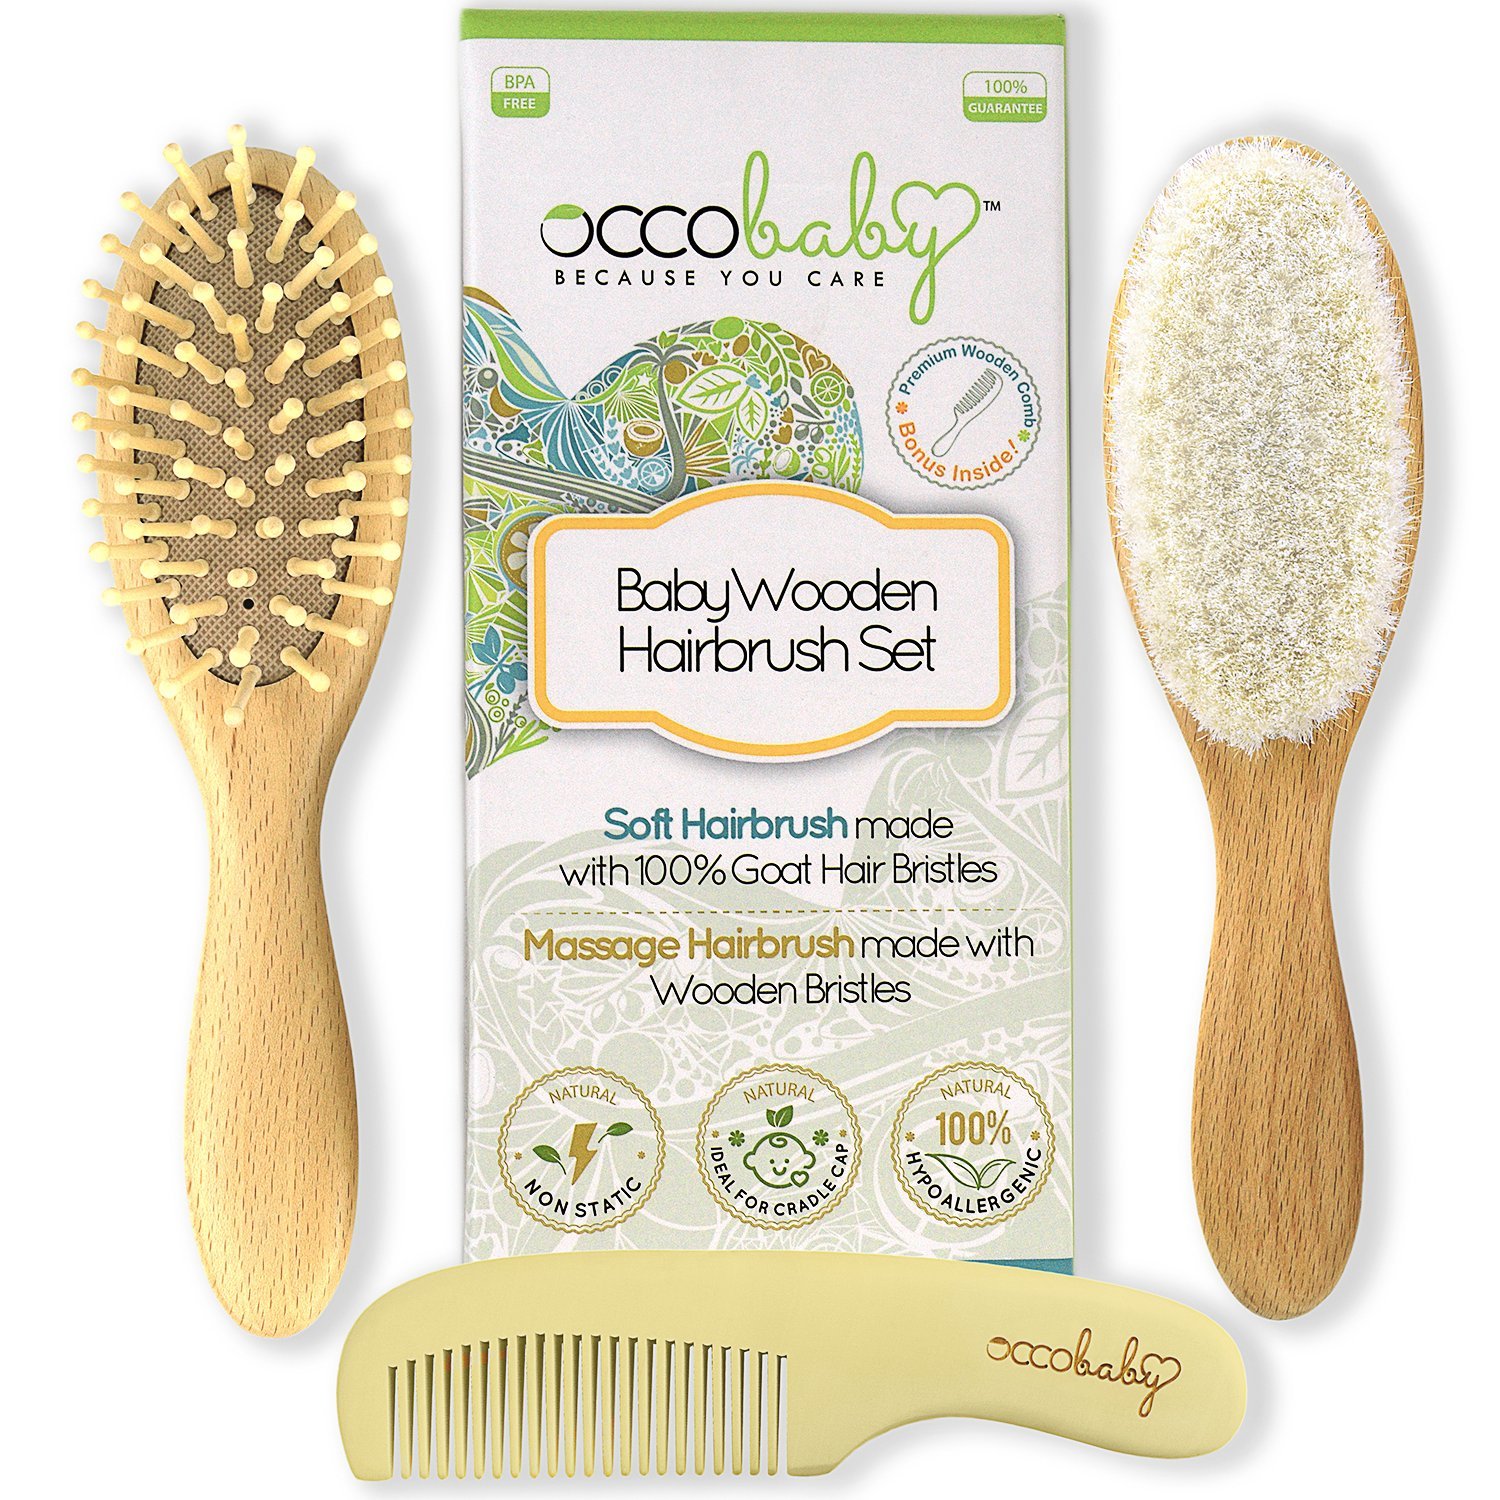 OCCObaby 3-Piece Wooden Best Baby Hair Brush and Comb Set